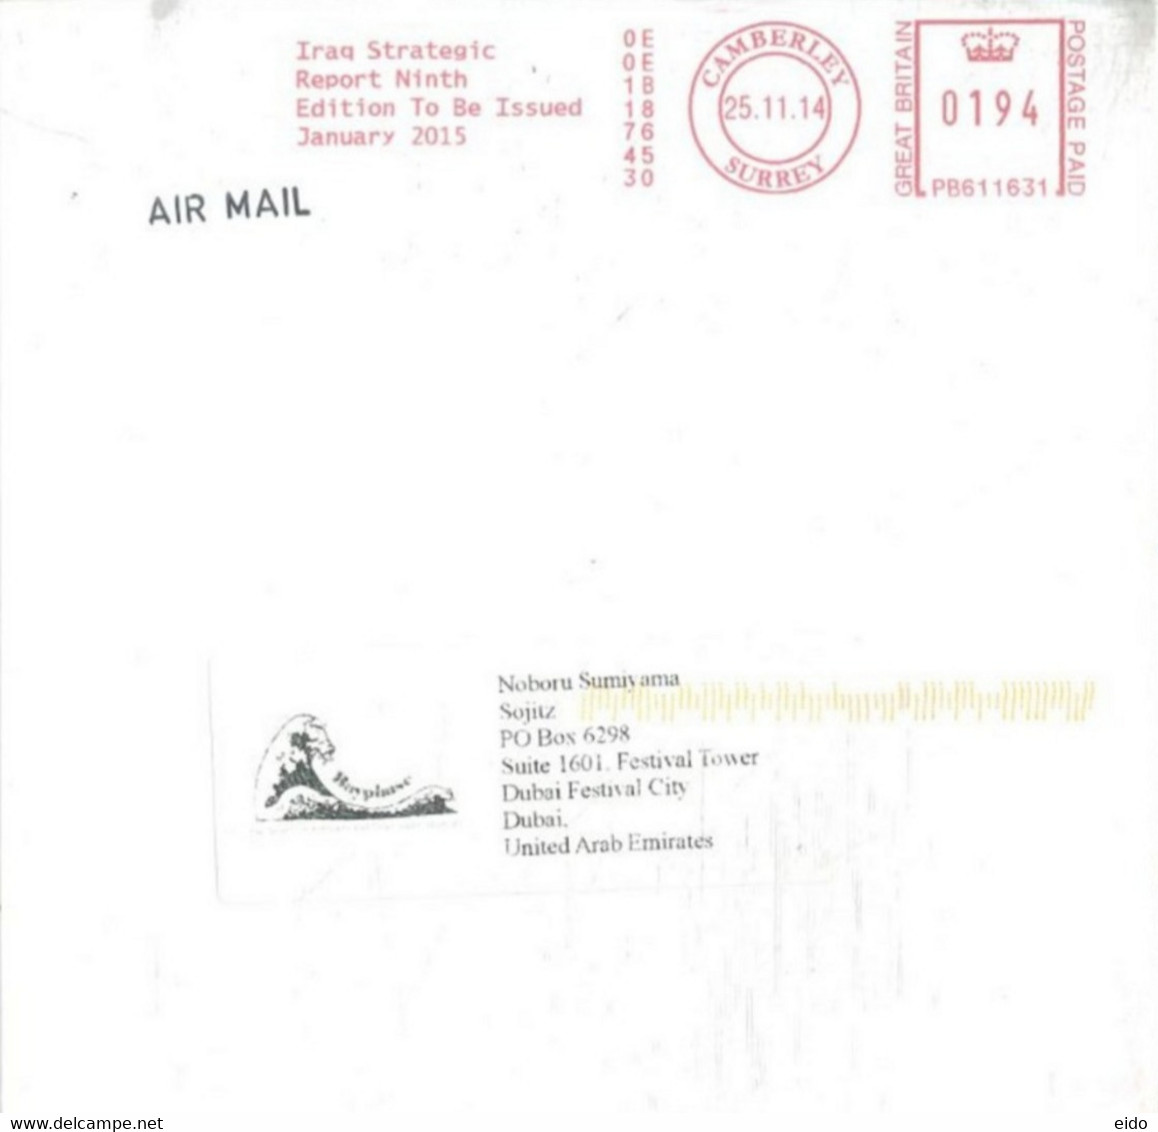 GREAT BRITAIN - 2014 - STAMP SEALED COVER TO DUBAI. - Imperforated